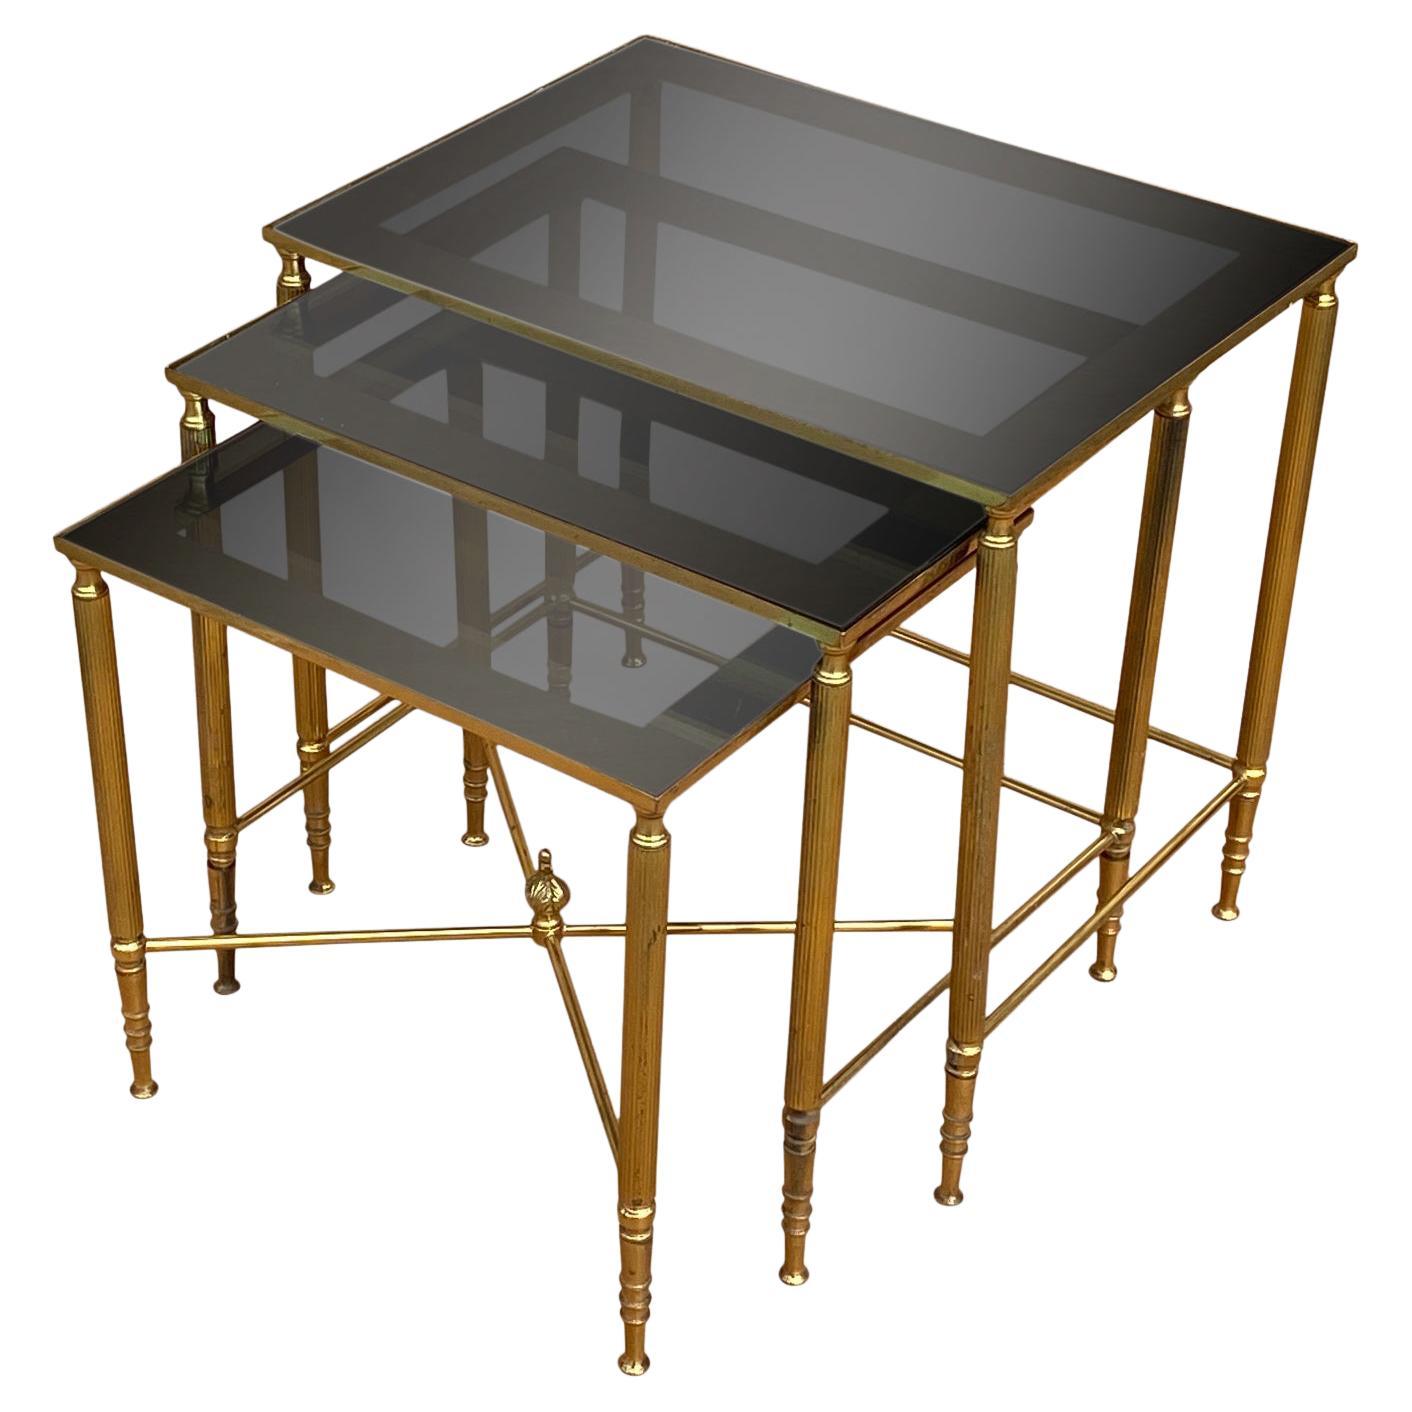 20th Century Nest of 3 Brass Tables with Smoked Glass and Mirror Frame Tops